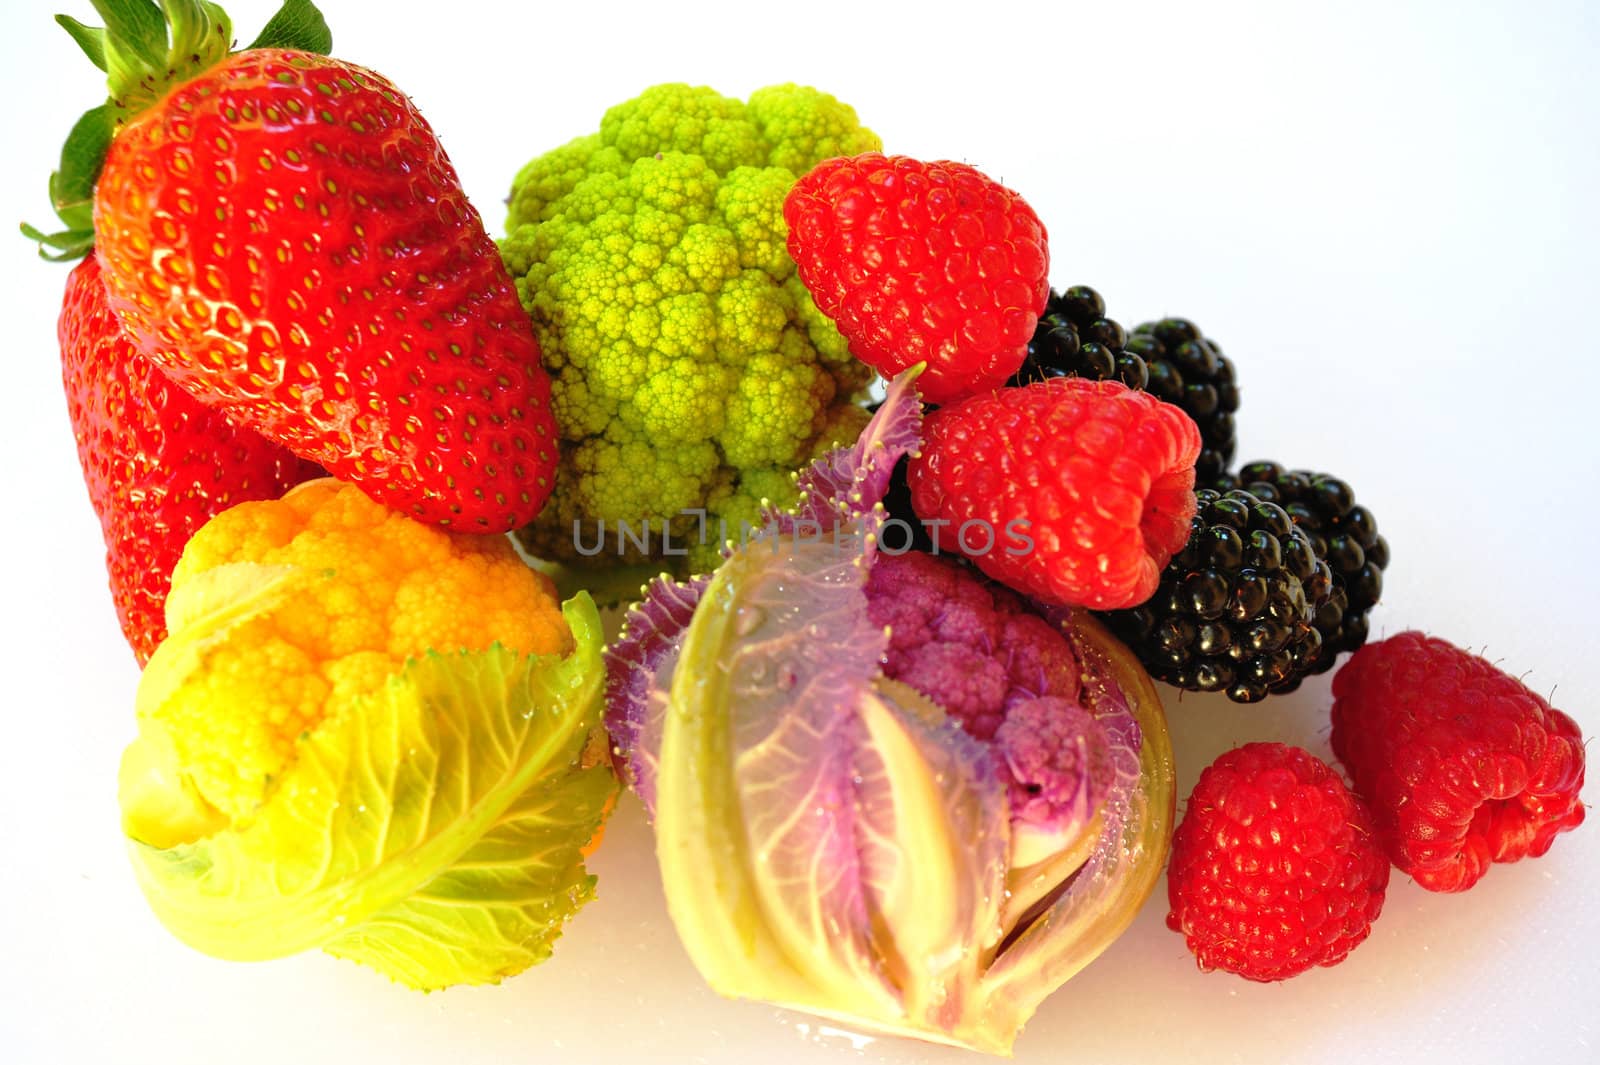 Isolated Vegetables, Blackberry, Raspberry and Strawberries on a white background.